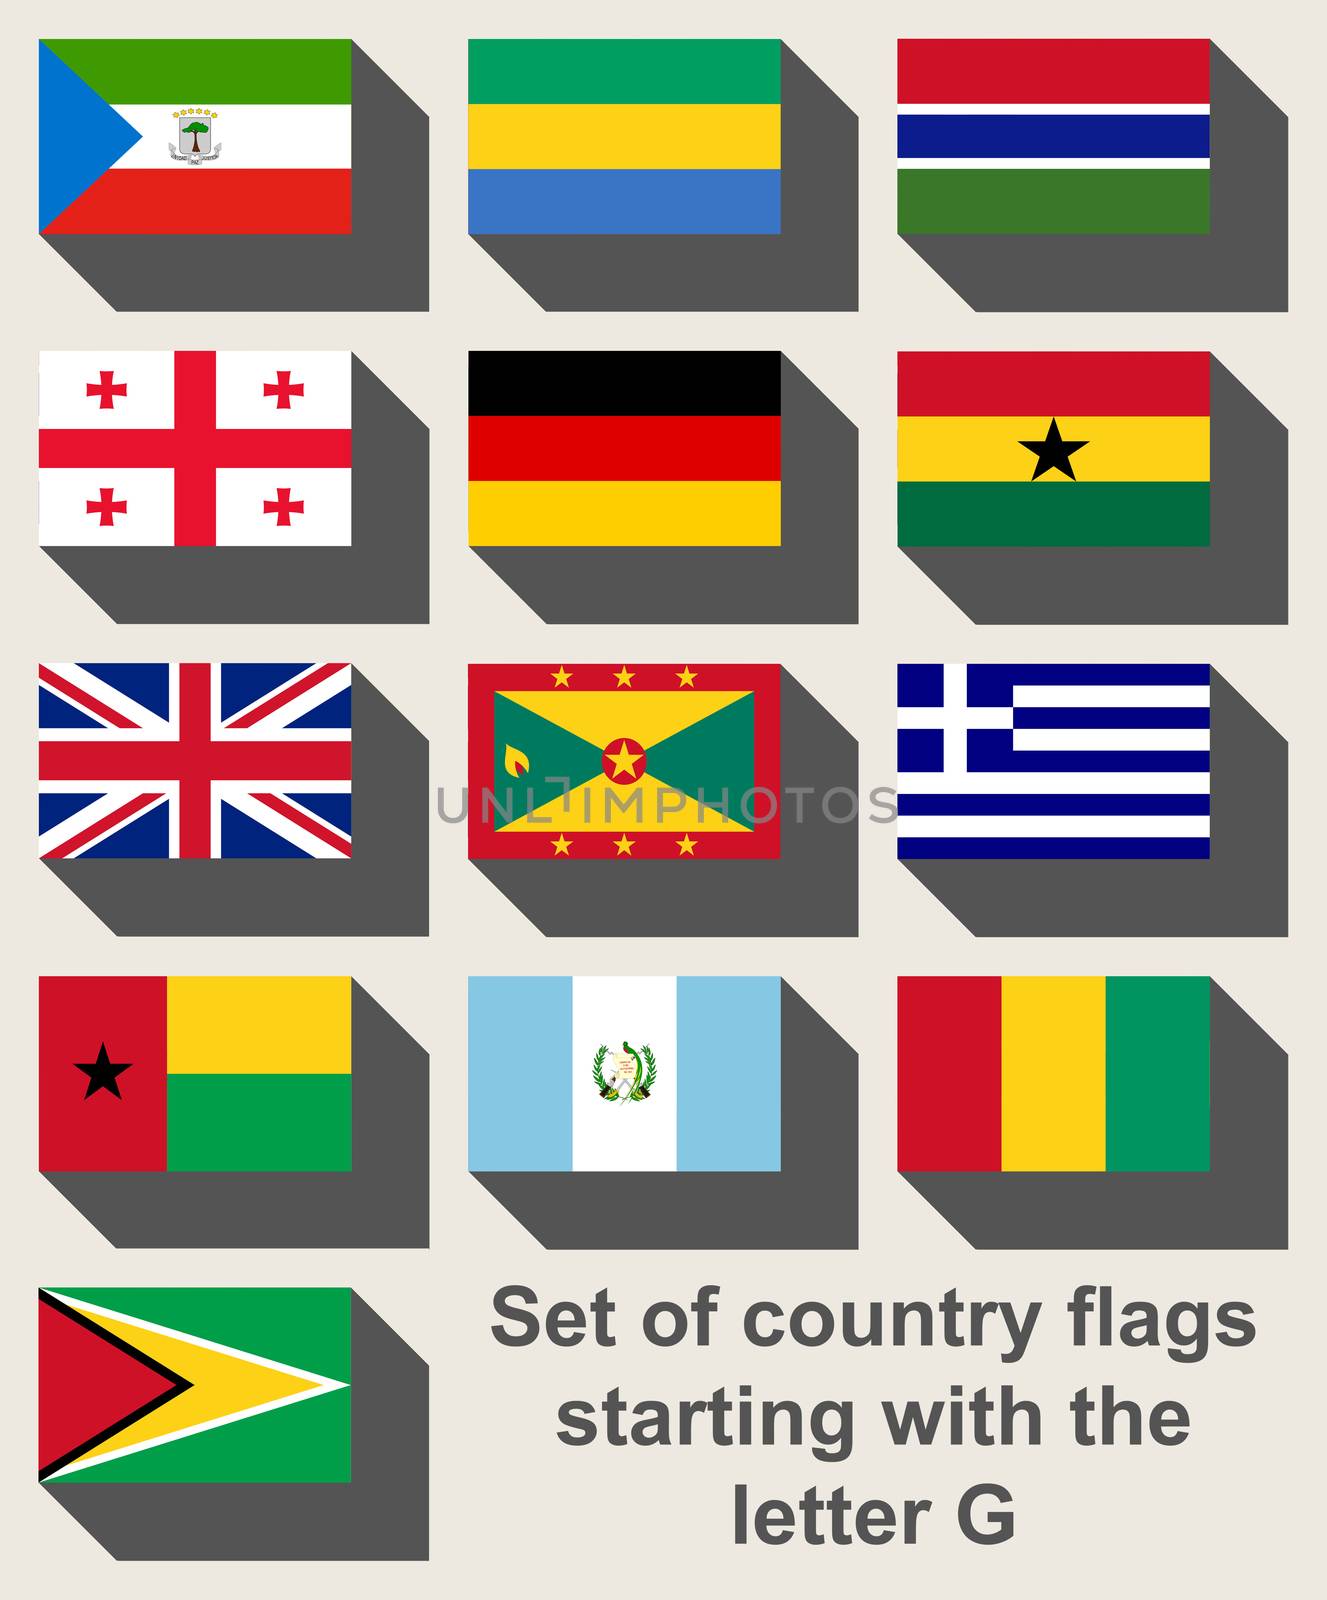 Set of flags starting with G by speedfighter